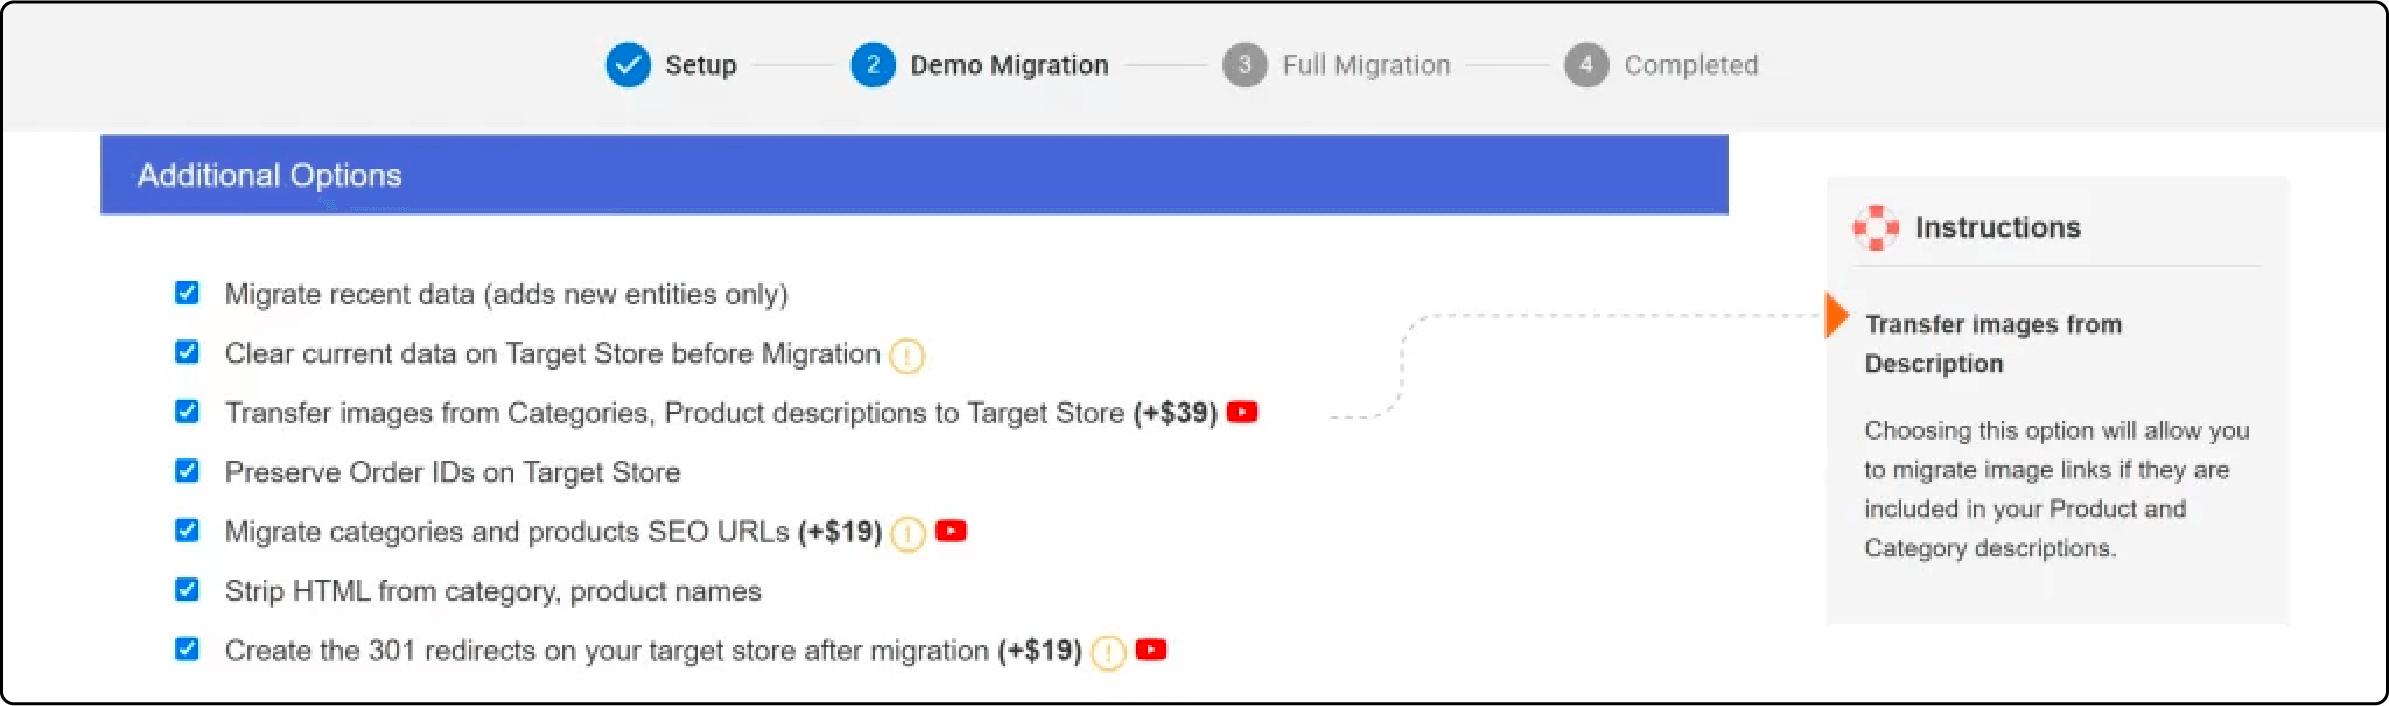 Custom Selection of Necessary Data Entities for Magento Migration